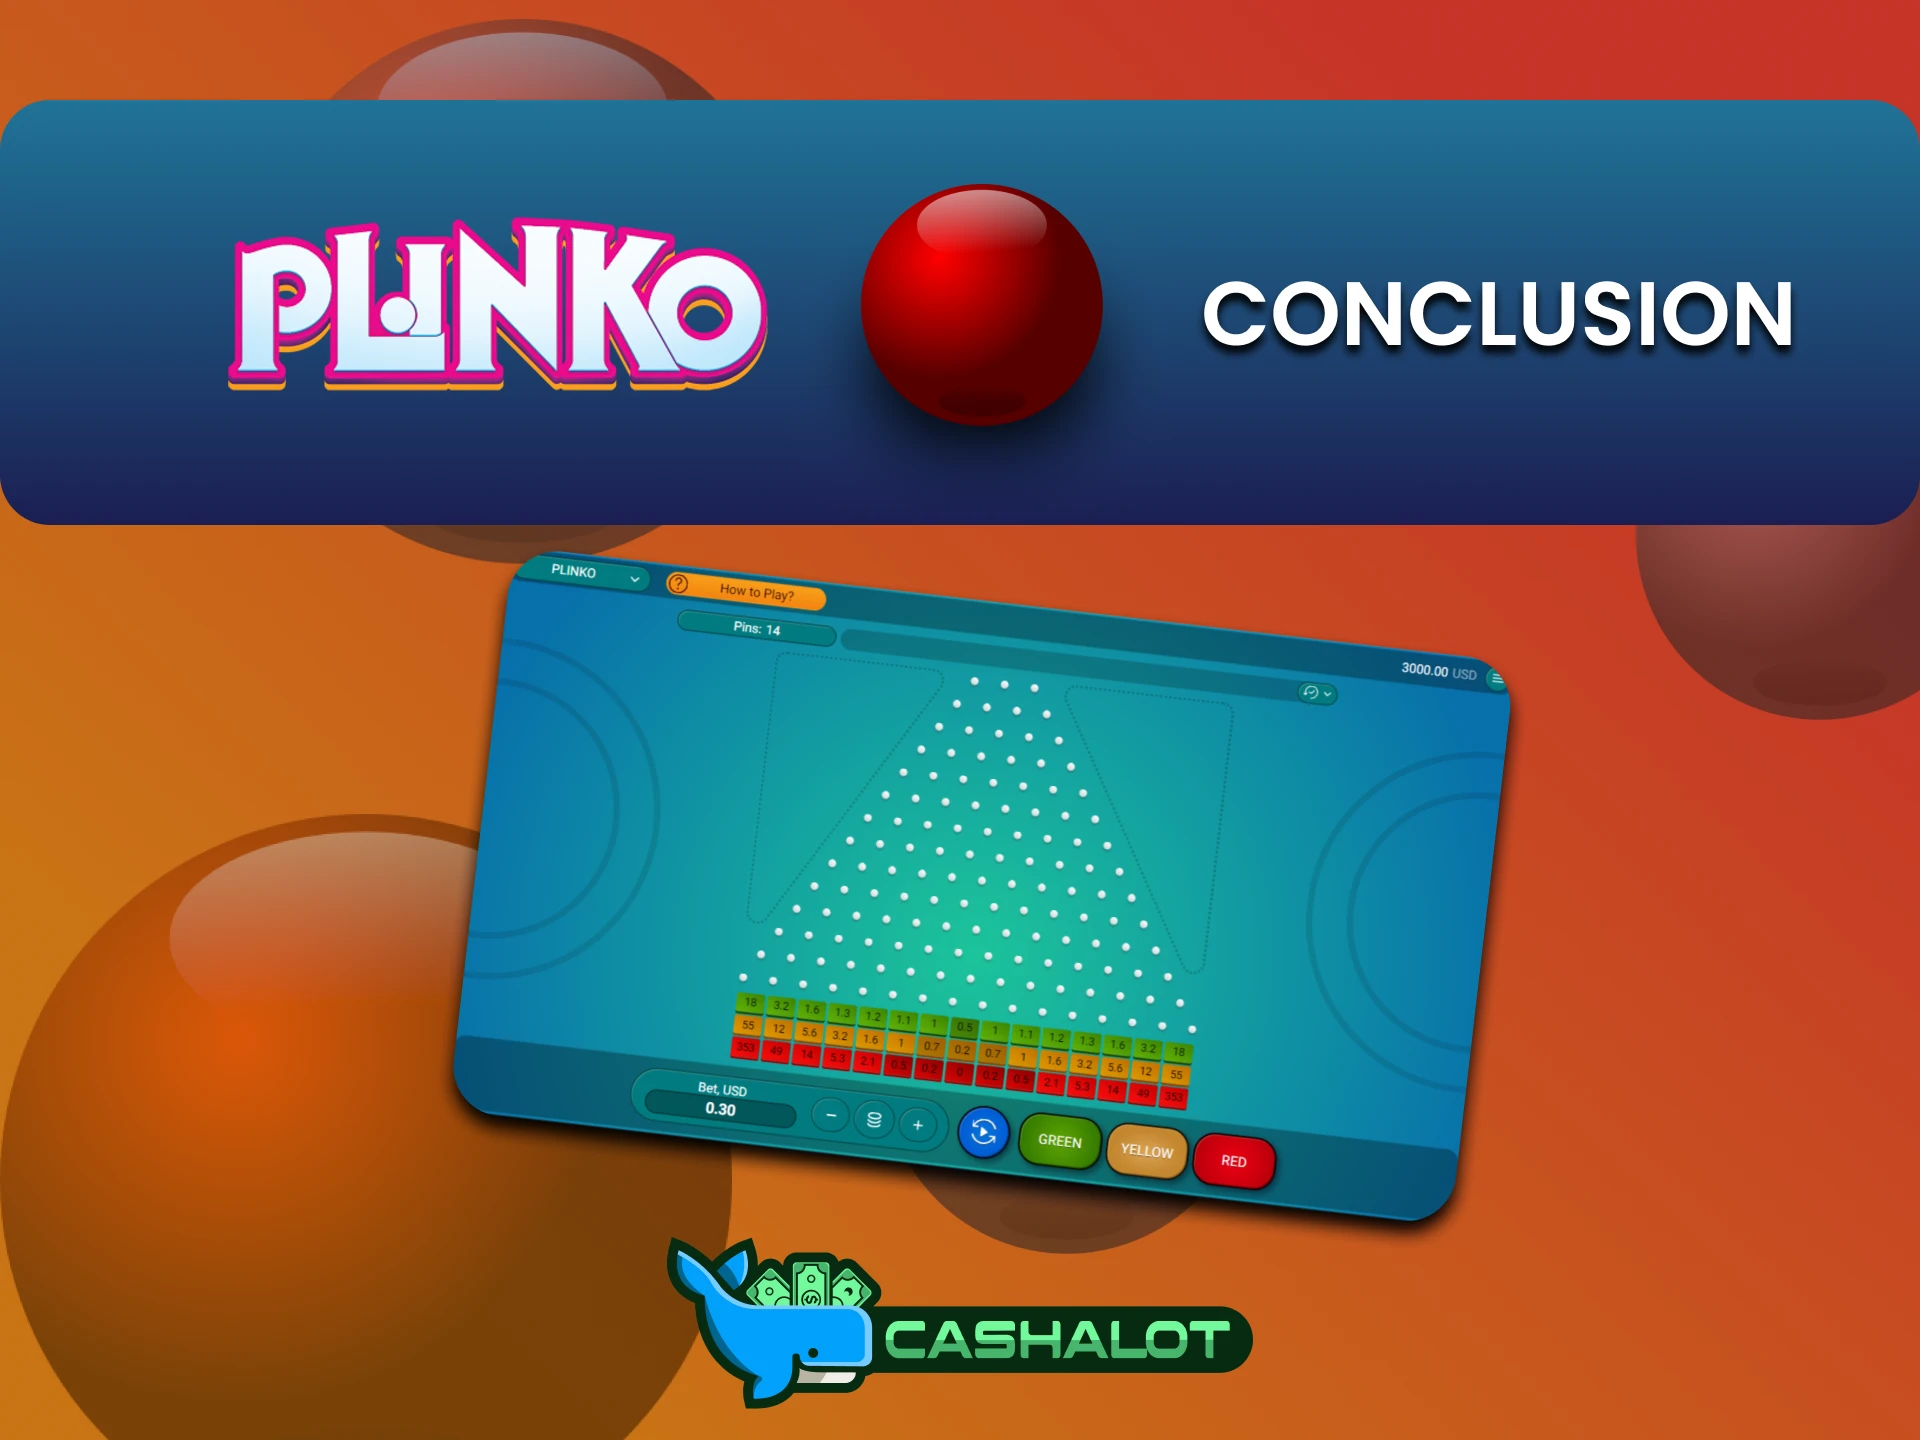 For playing Plinko, Cashalot is the best choice.